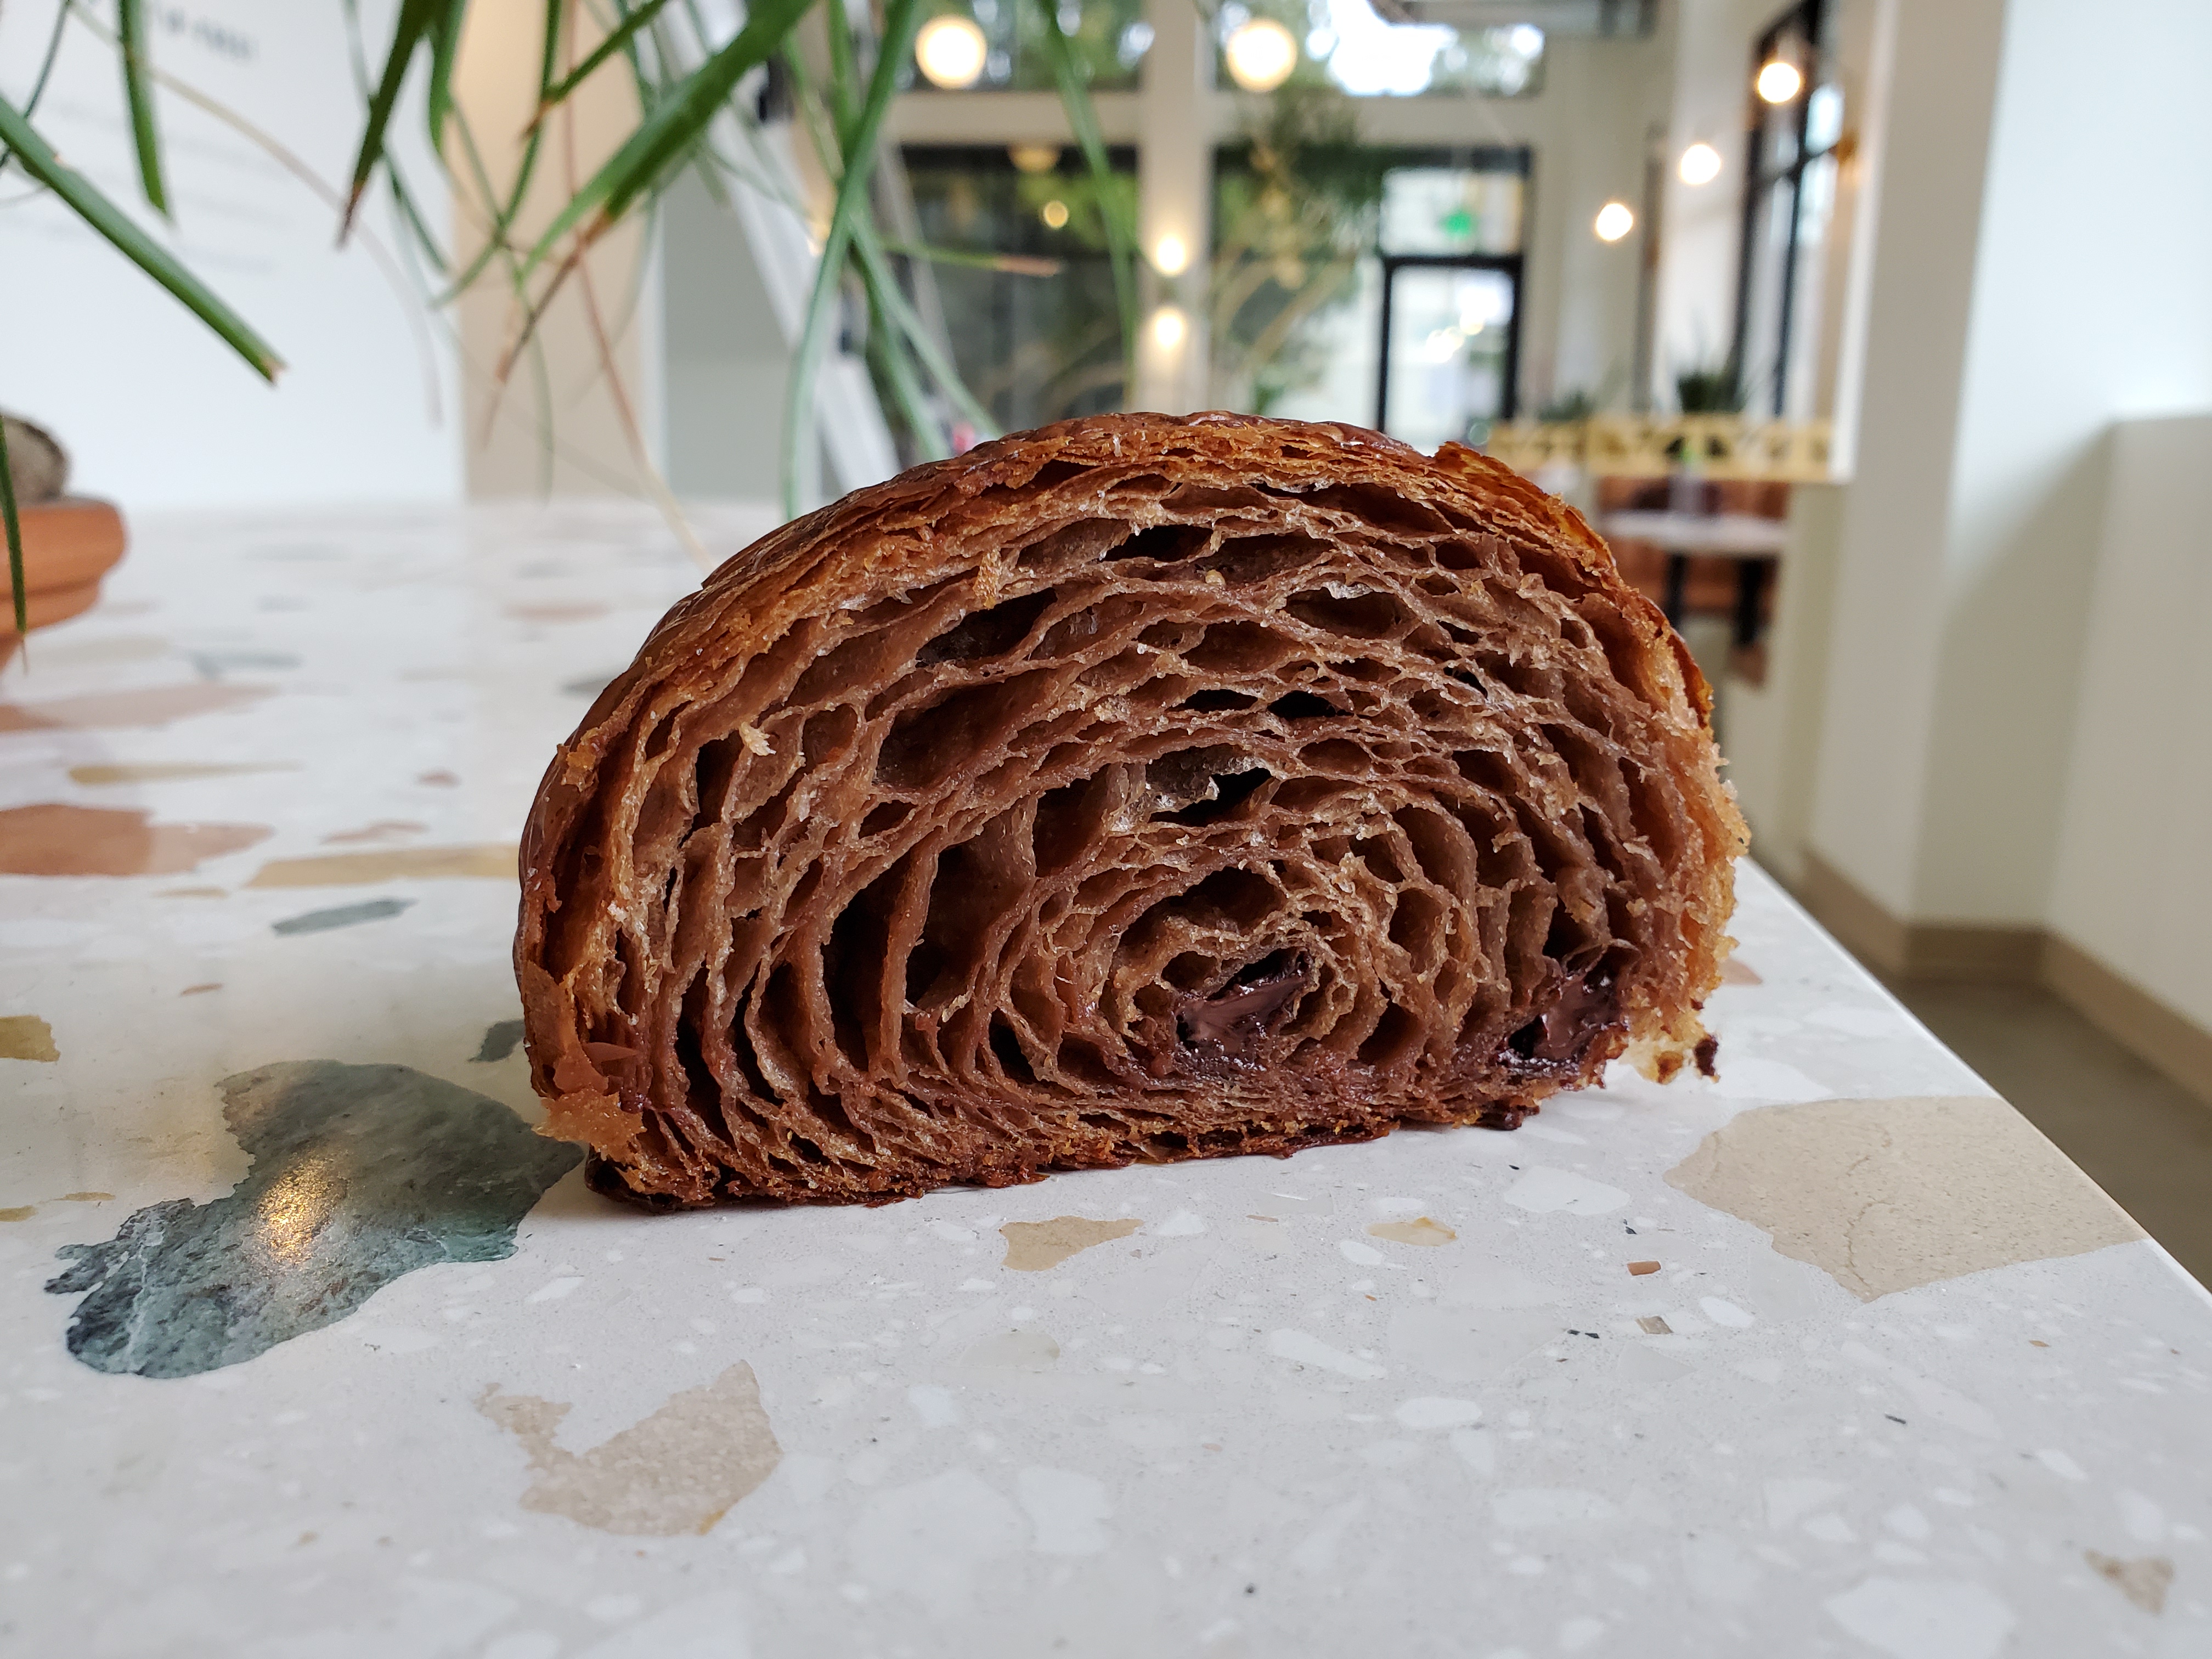 A closeup of a buckwheat croissant, shown as a cross-section on a marble countertop